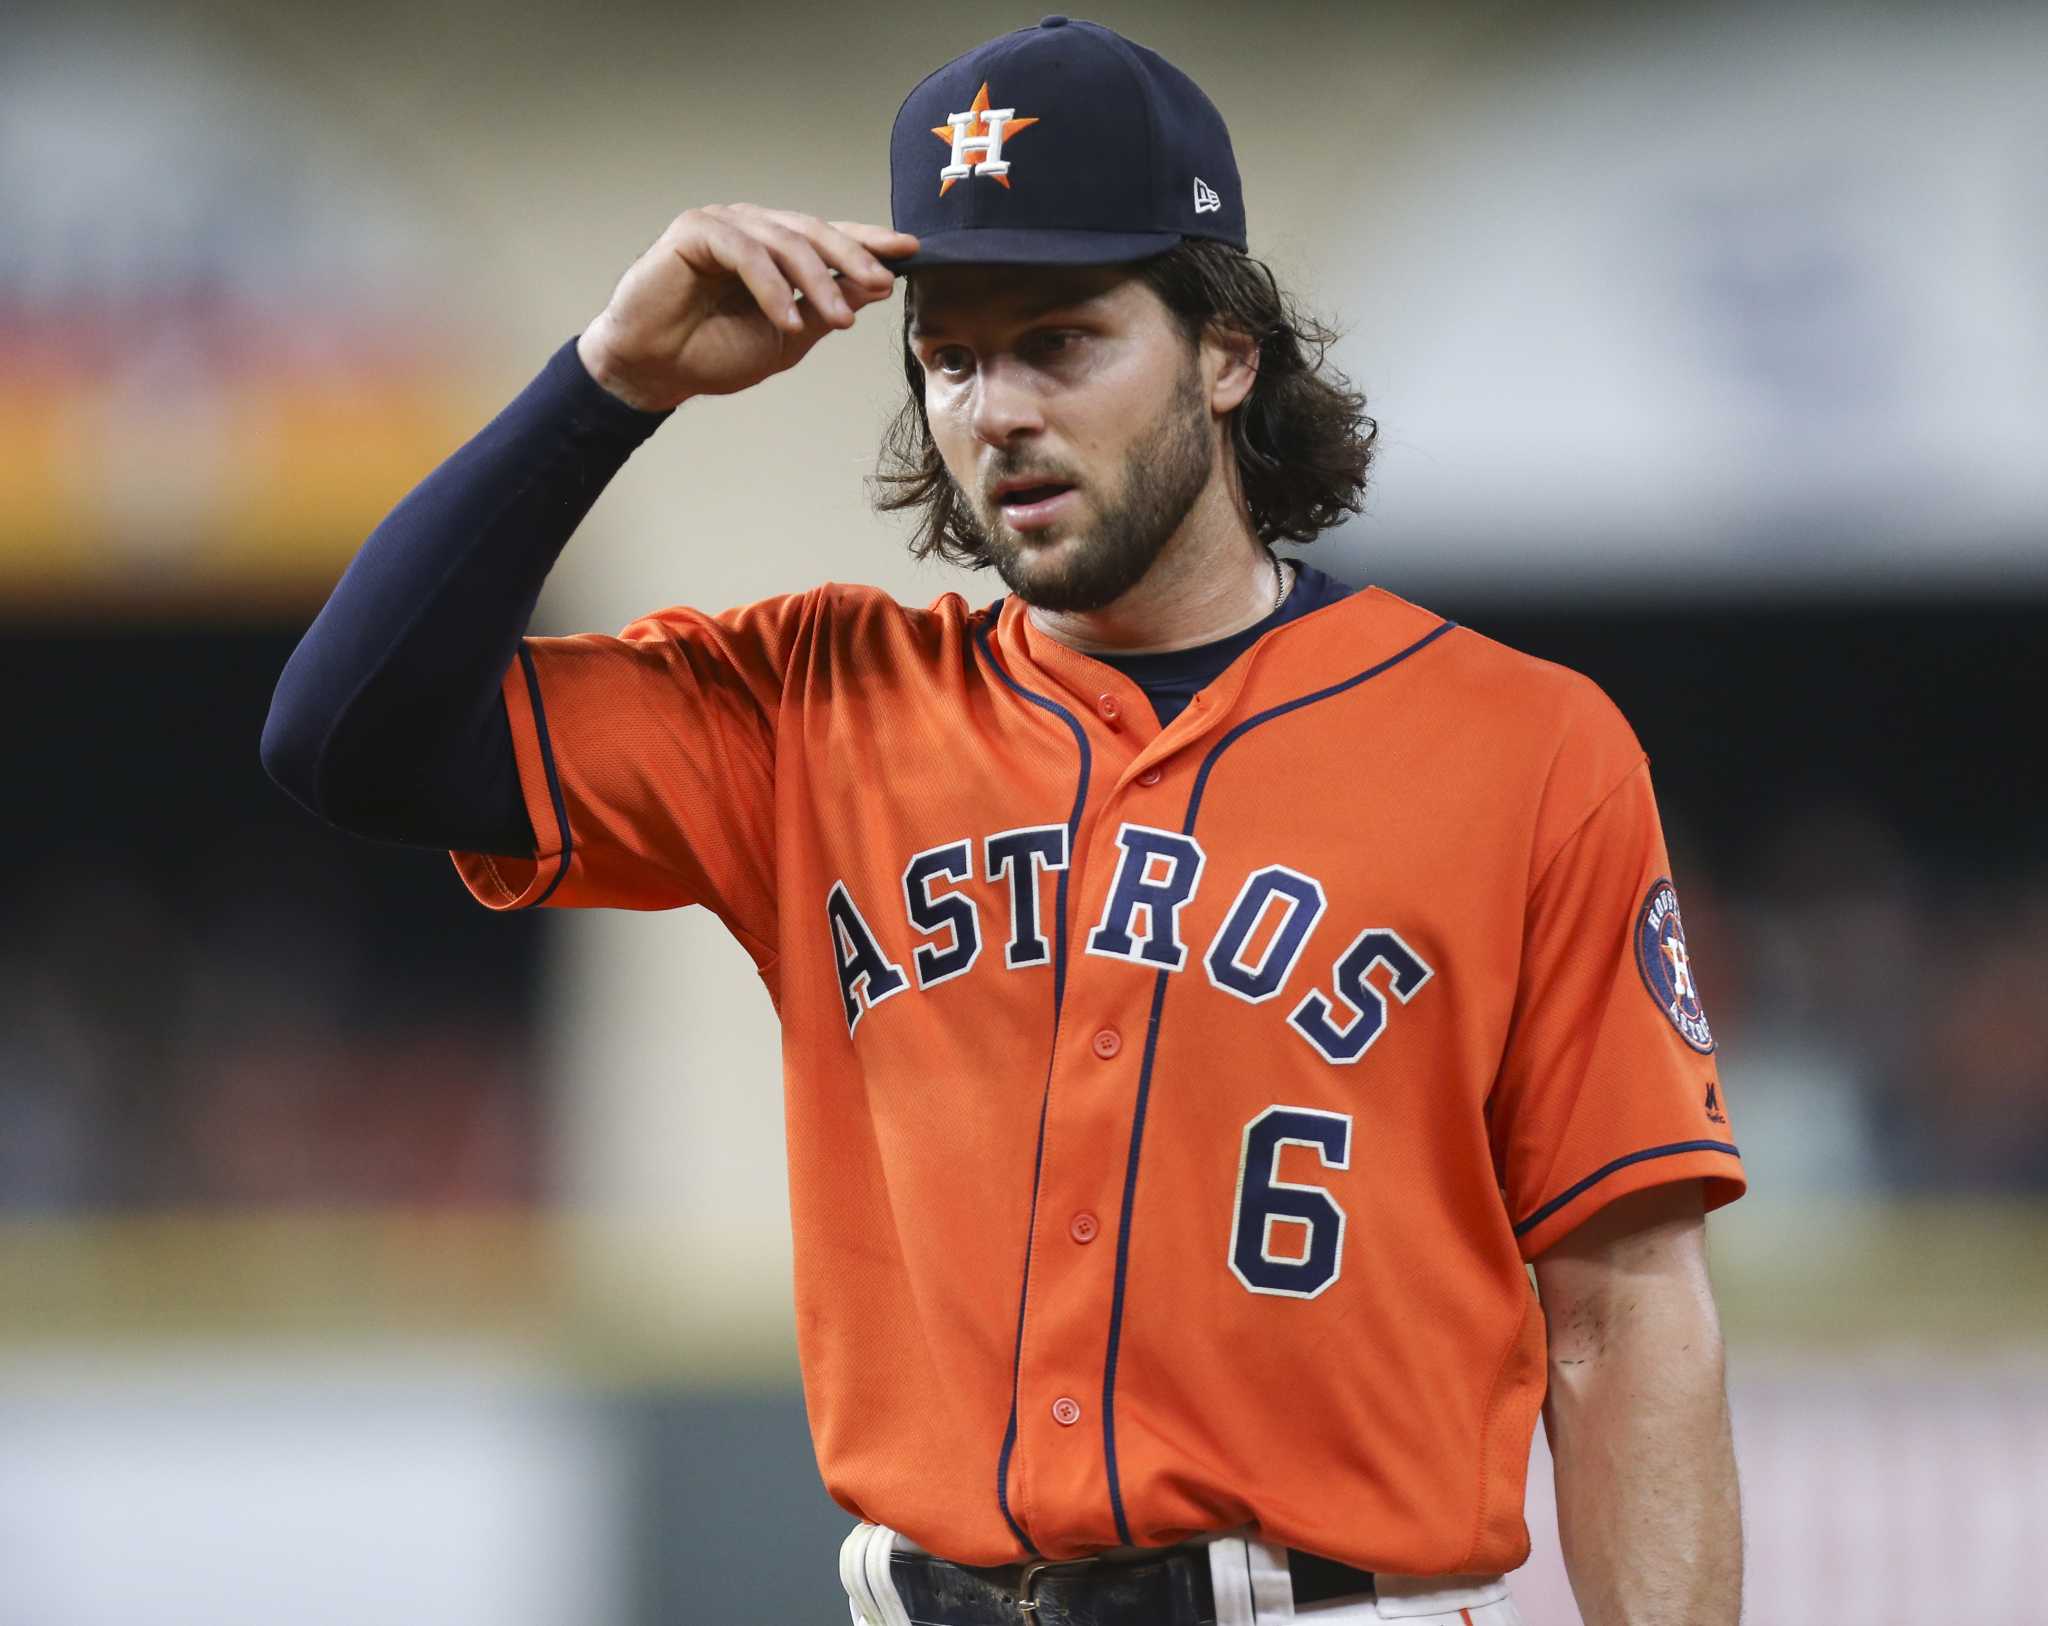 Jake Marisnick: 5 facts about the Houston Astros outfielder